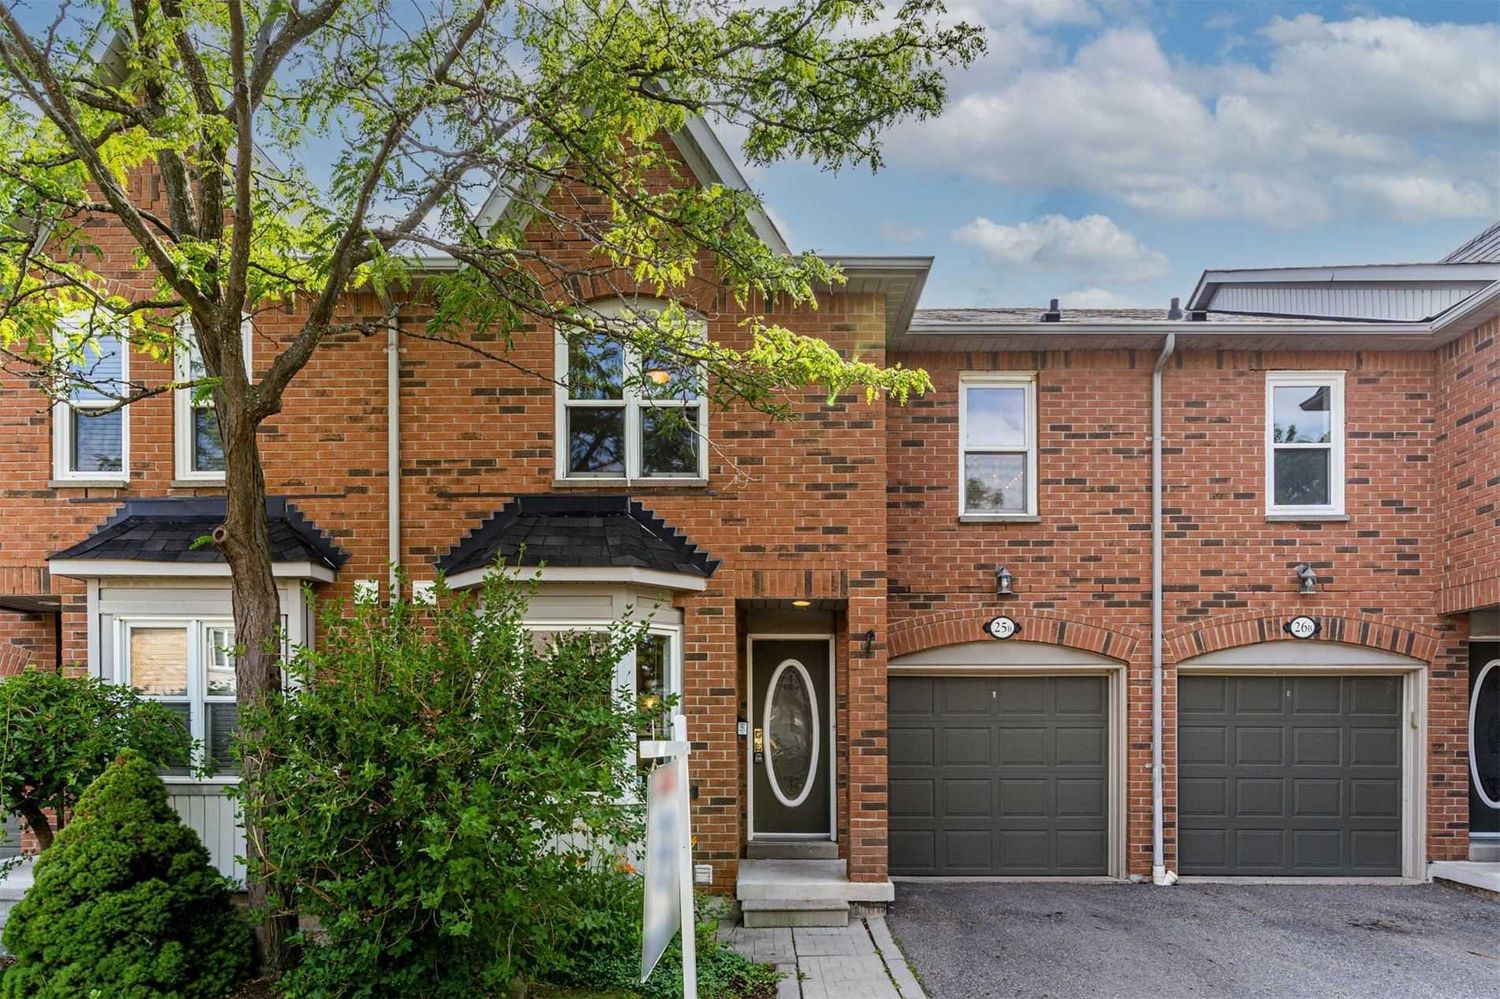 5865 Dalebrook Crescent. 5865 Dalebrook Crescent Townhomes is located in  Mississauga, Toronto - image #2 of 2